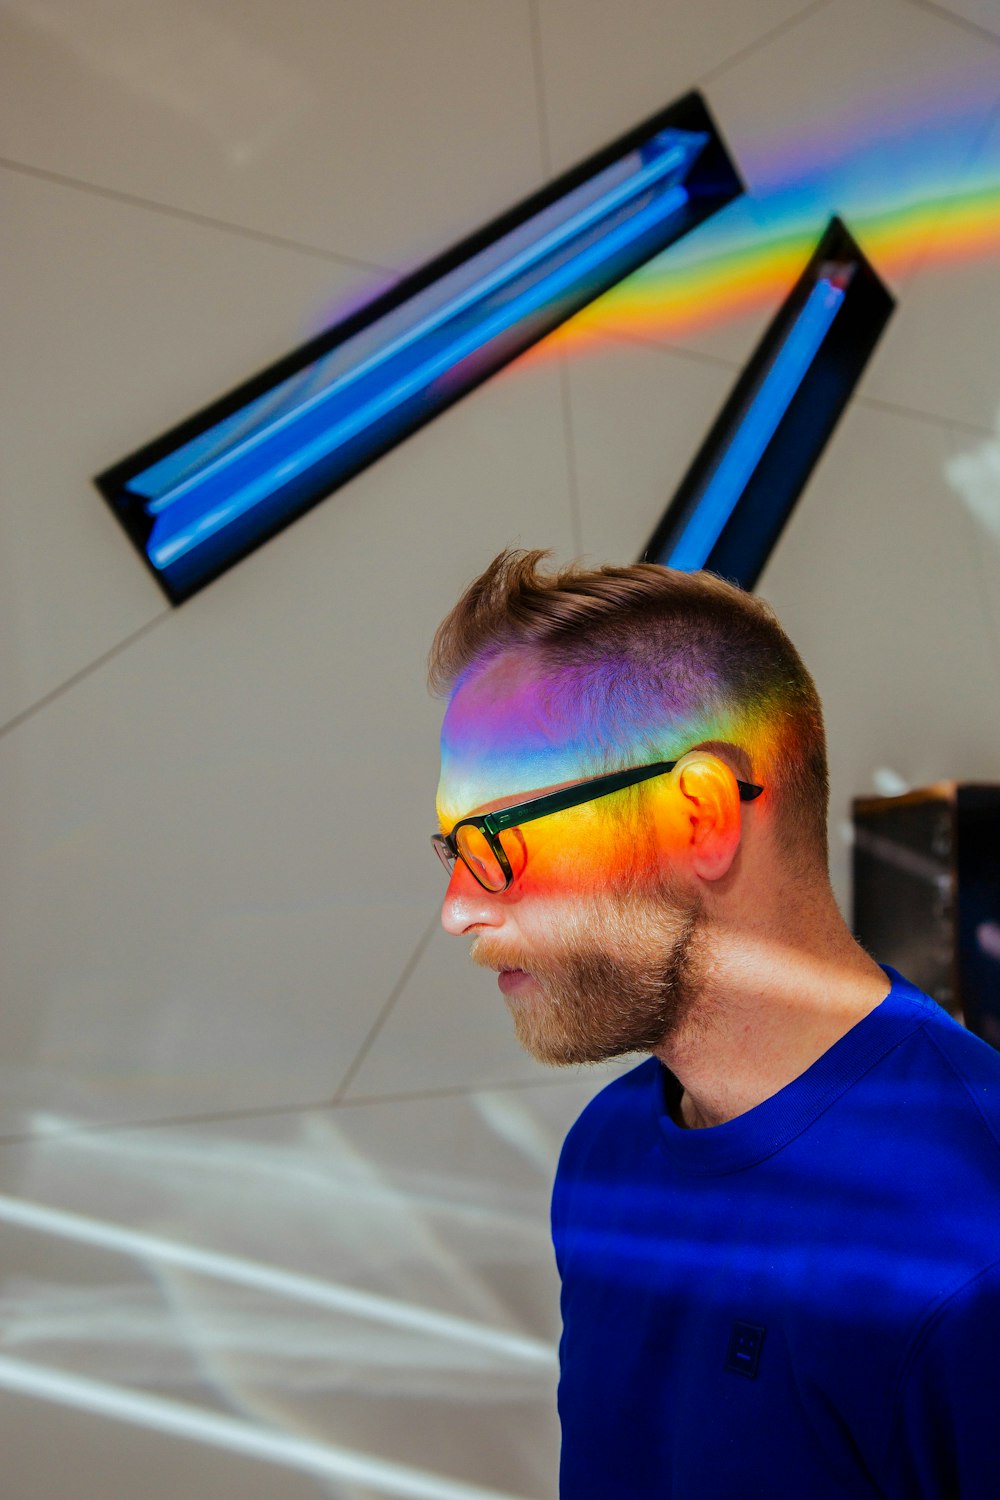 man with multiple colors reflected on his face